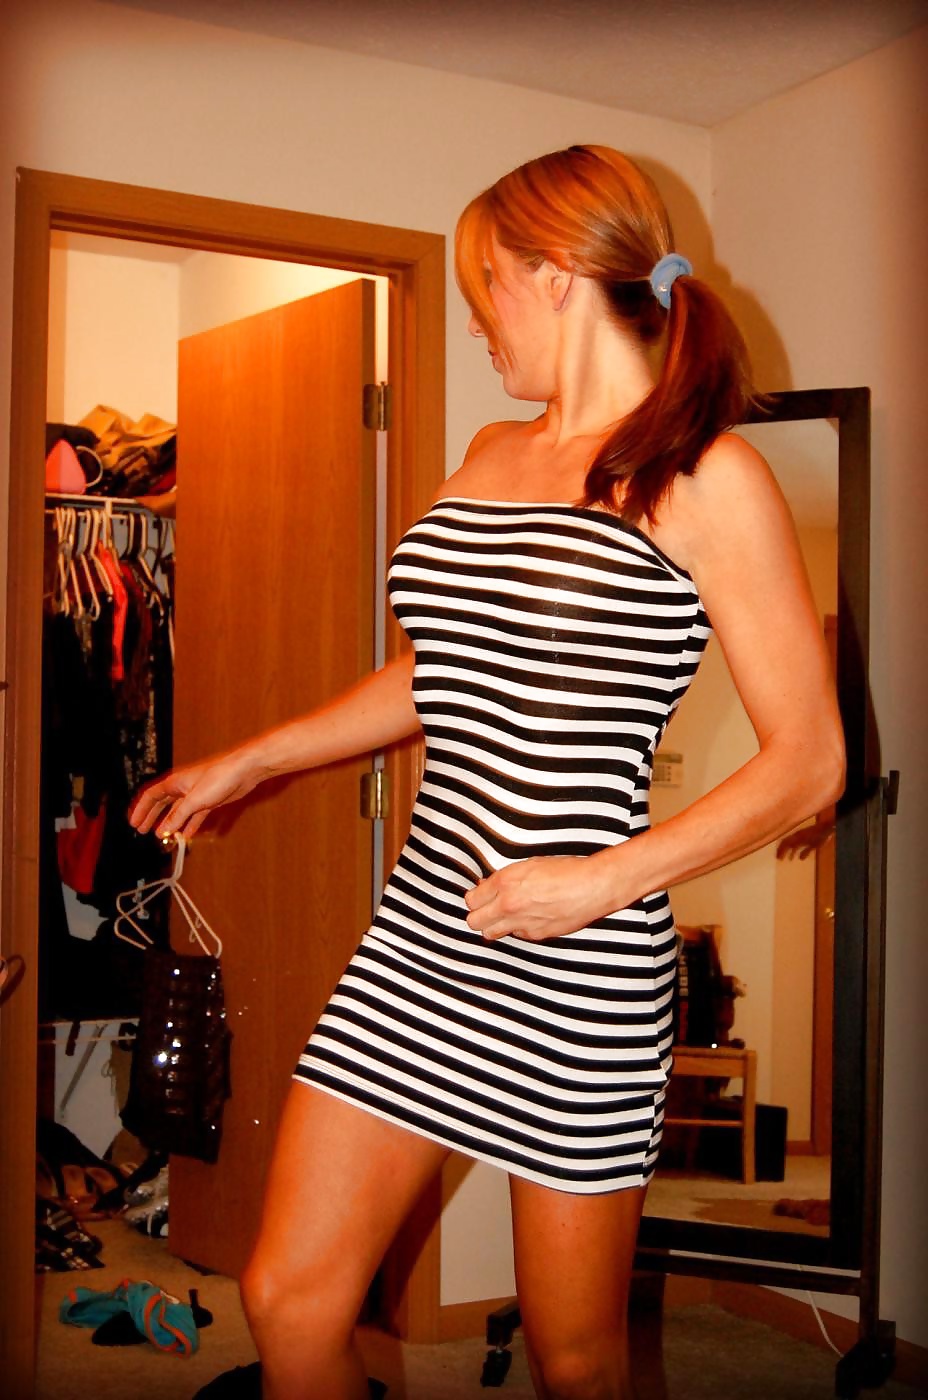 Wife likes dressing up pict gal